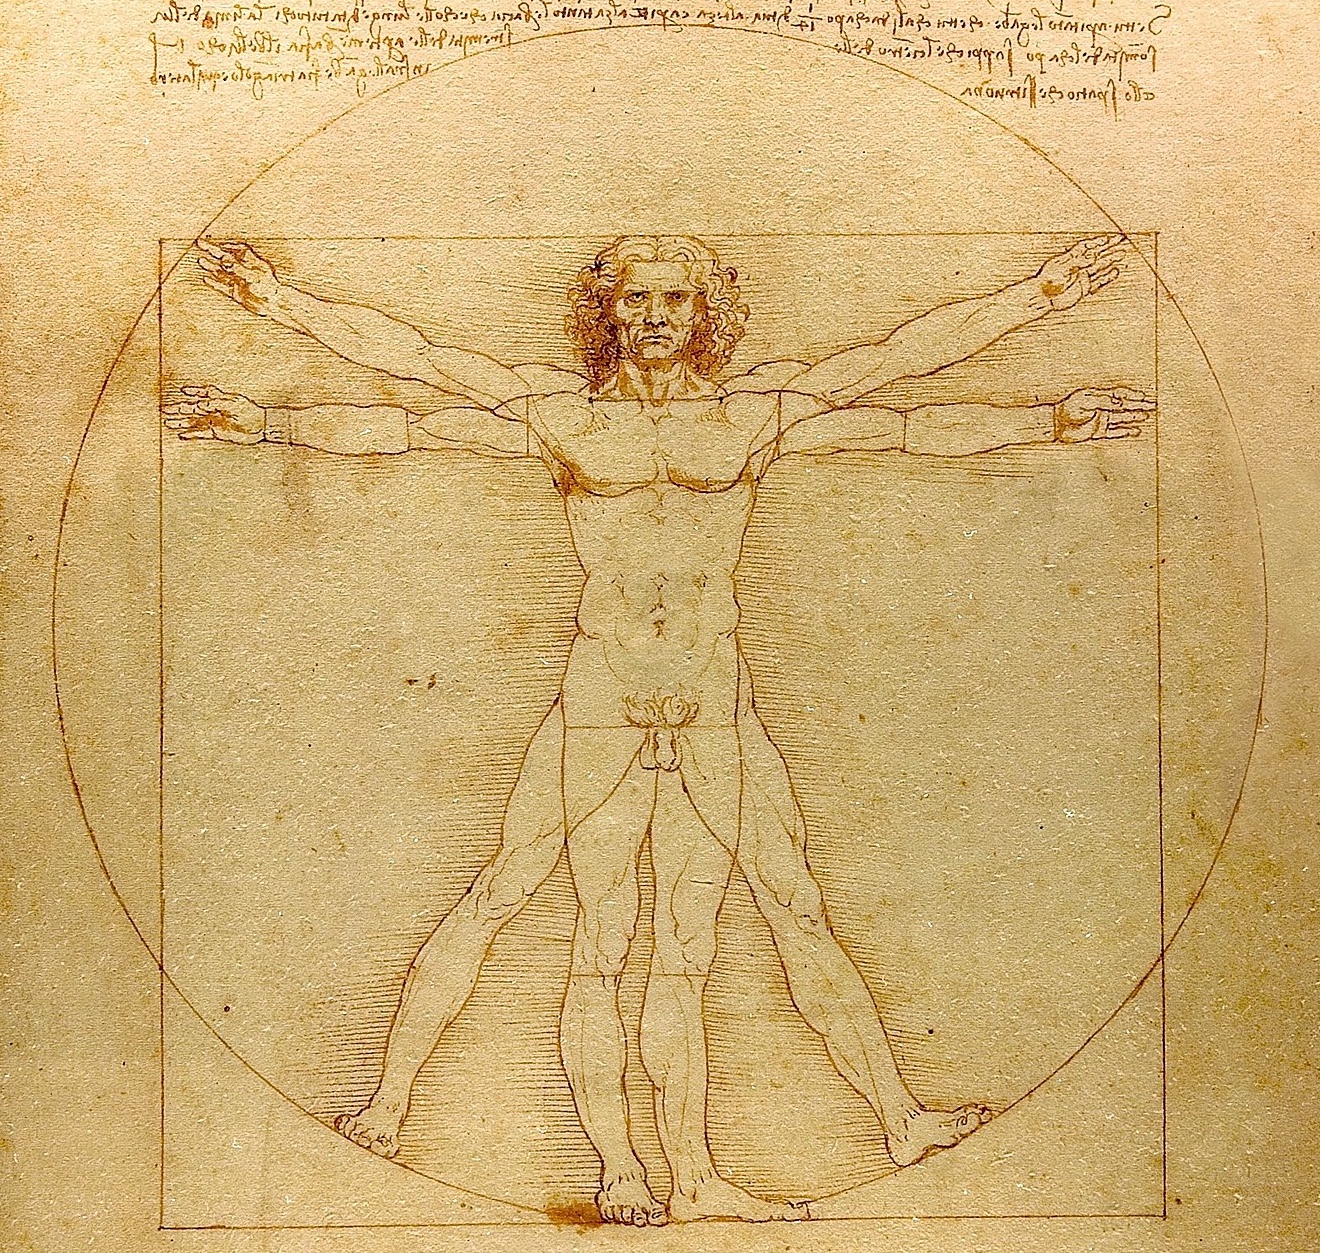 A drawing of the vitruvian man by leonardo da vinci, illustrating human body proportions within a circle and a square.